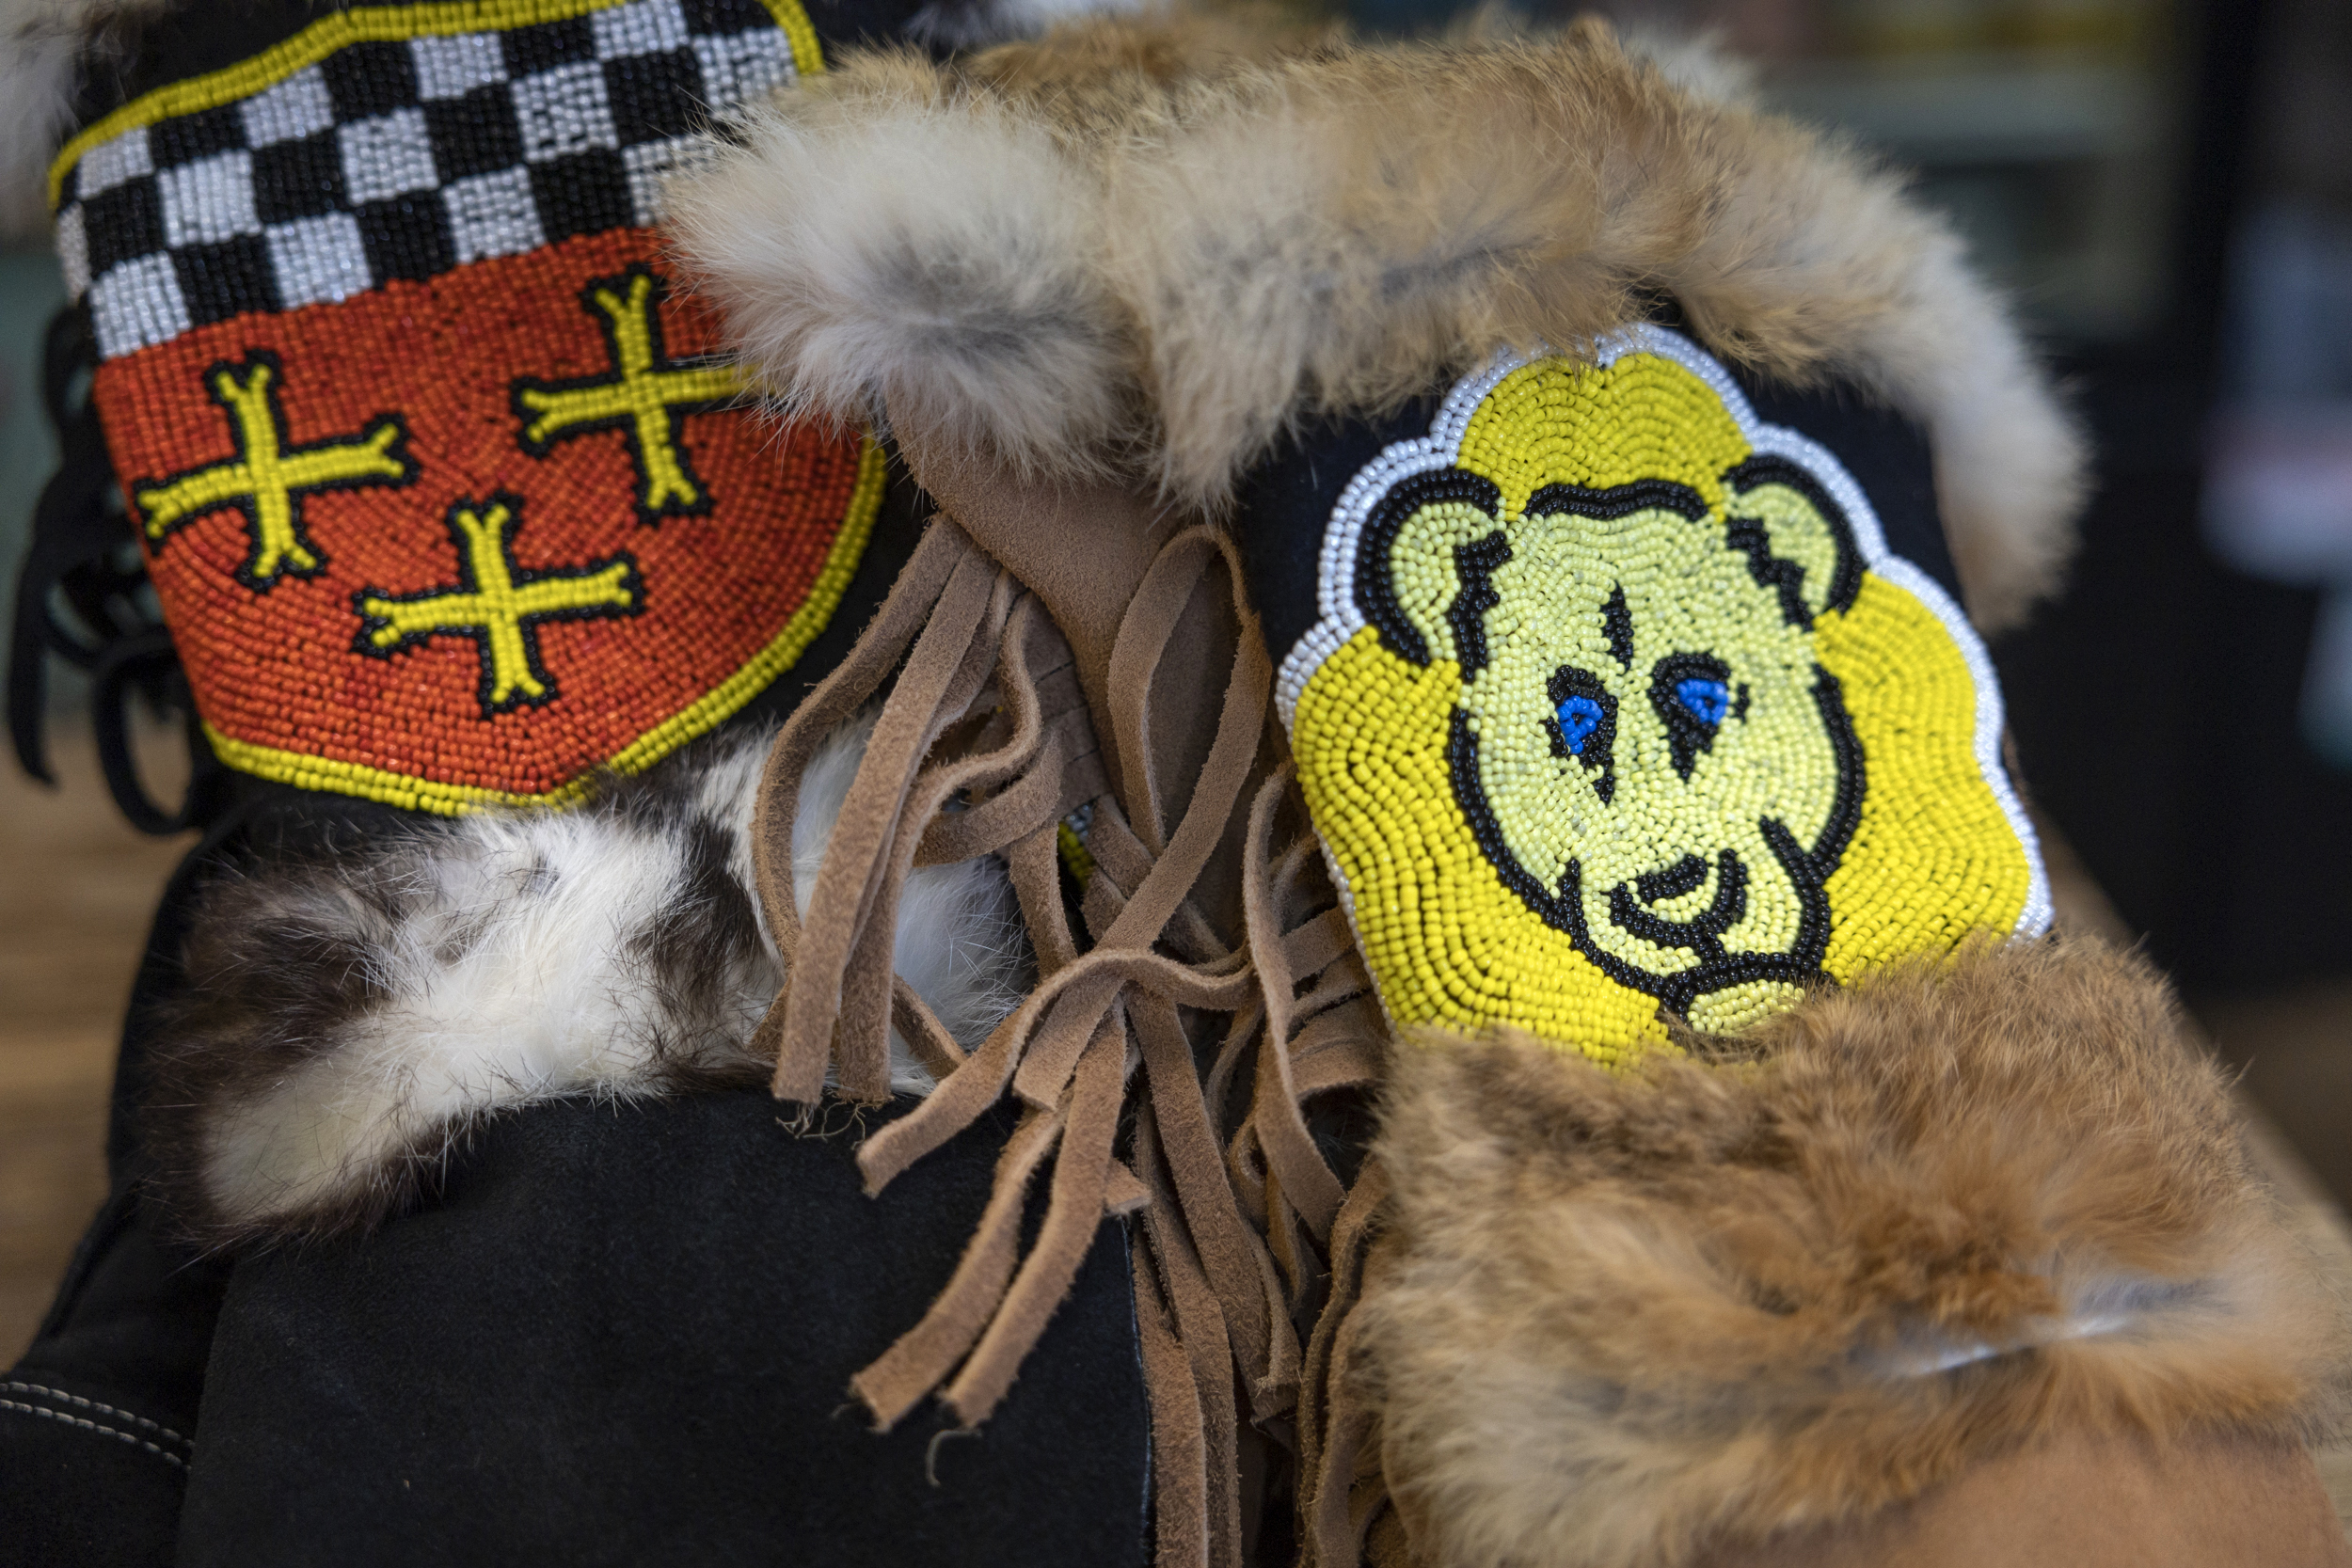 A close-up of the beadwork on a pair of mittens